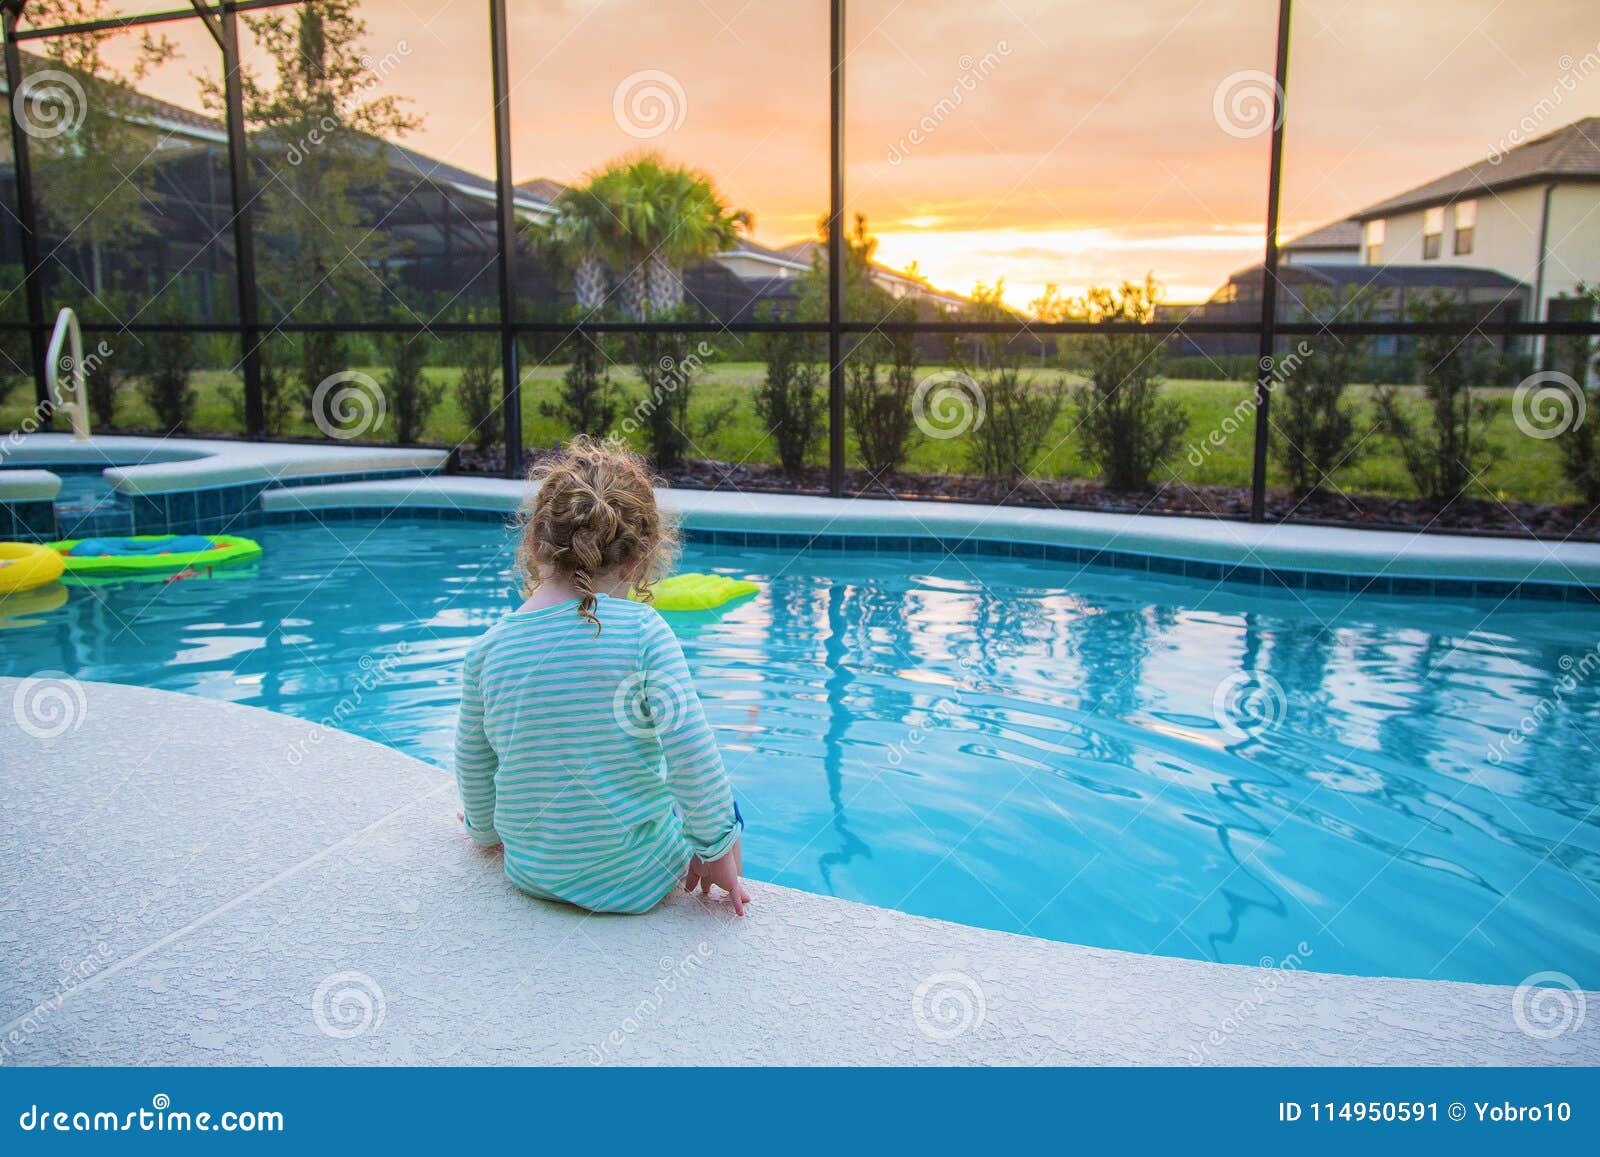 child sitting on the edge of a swimming pool on a warm summer day